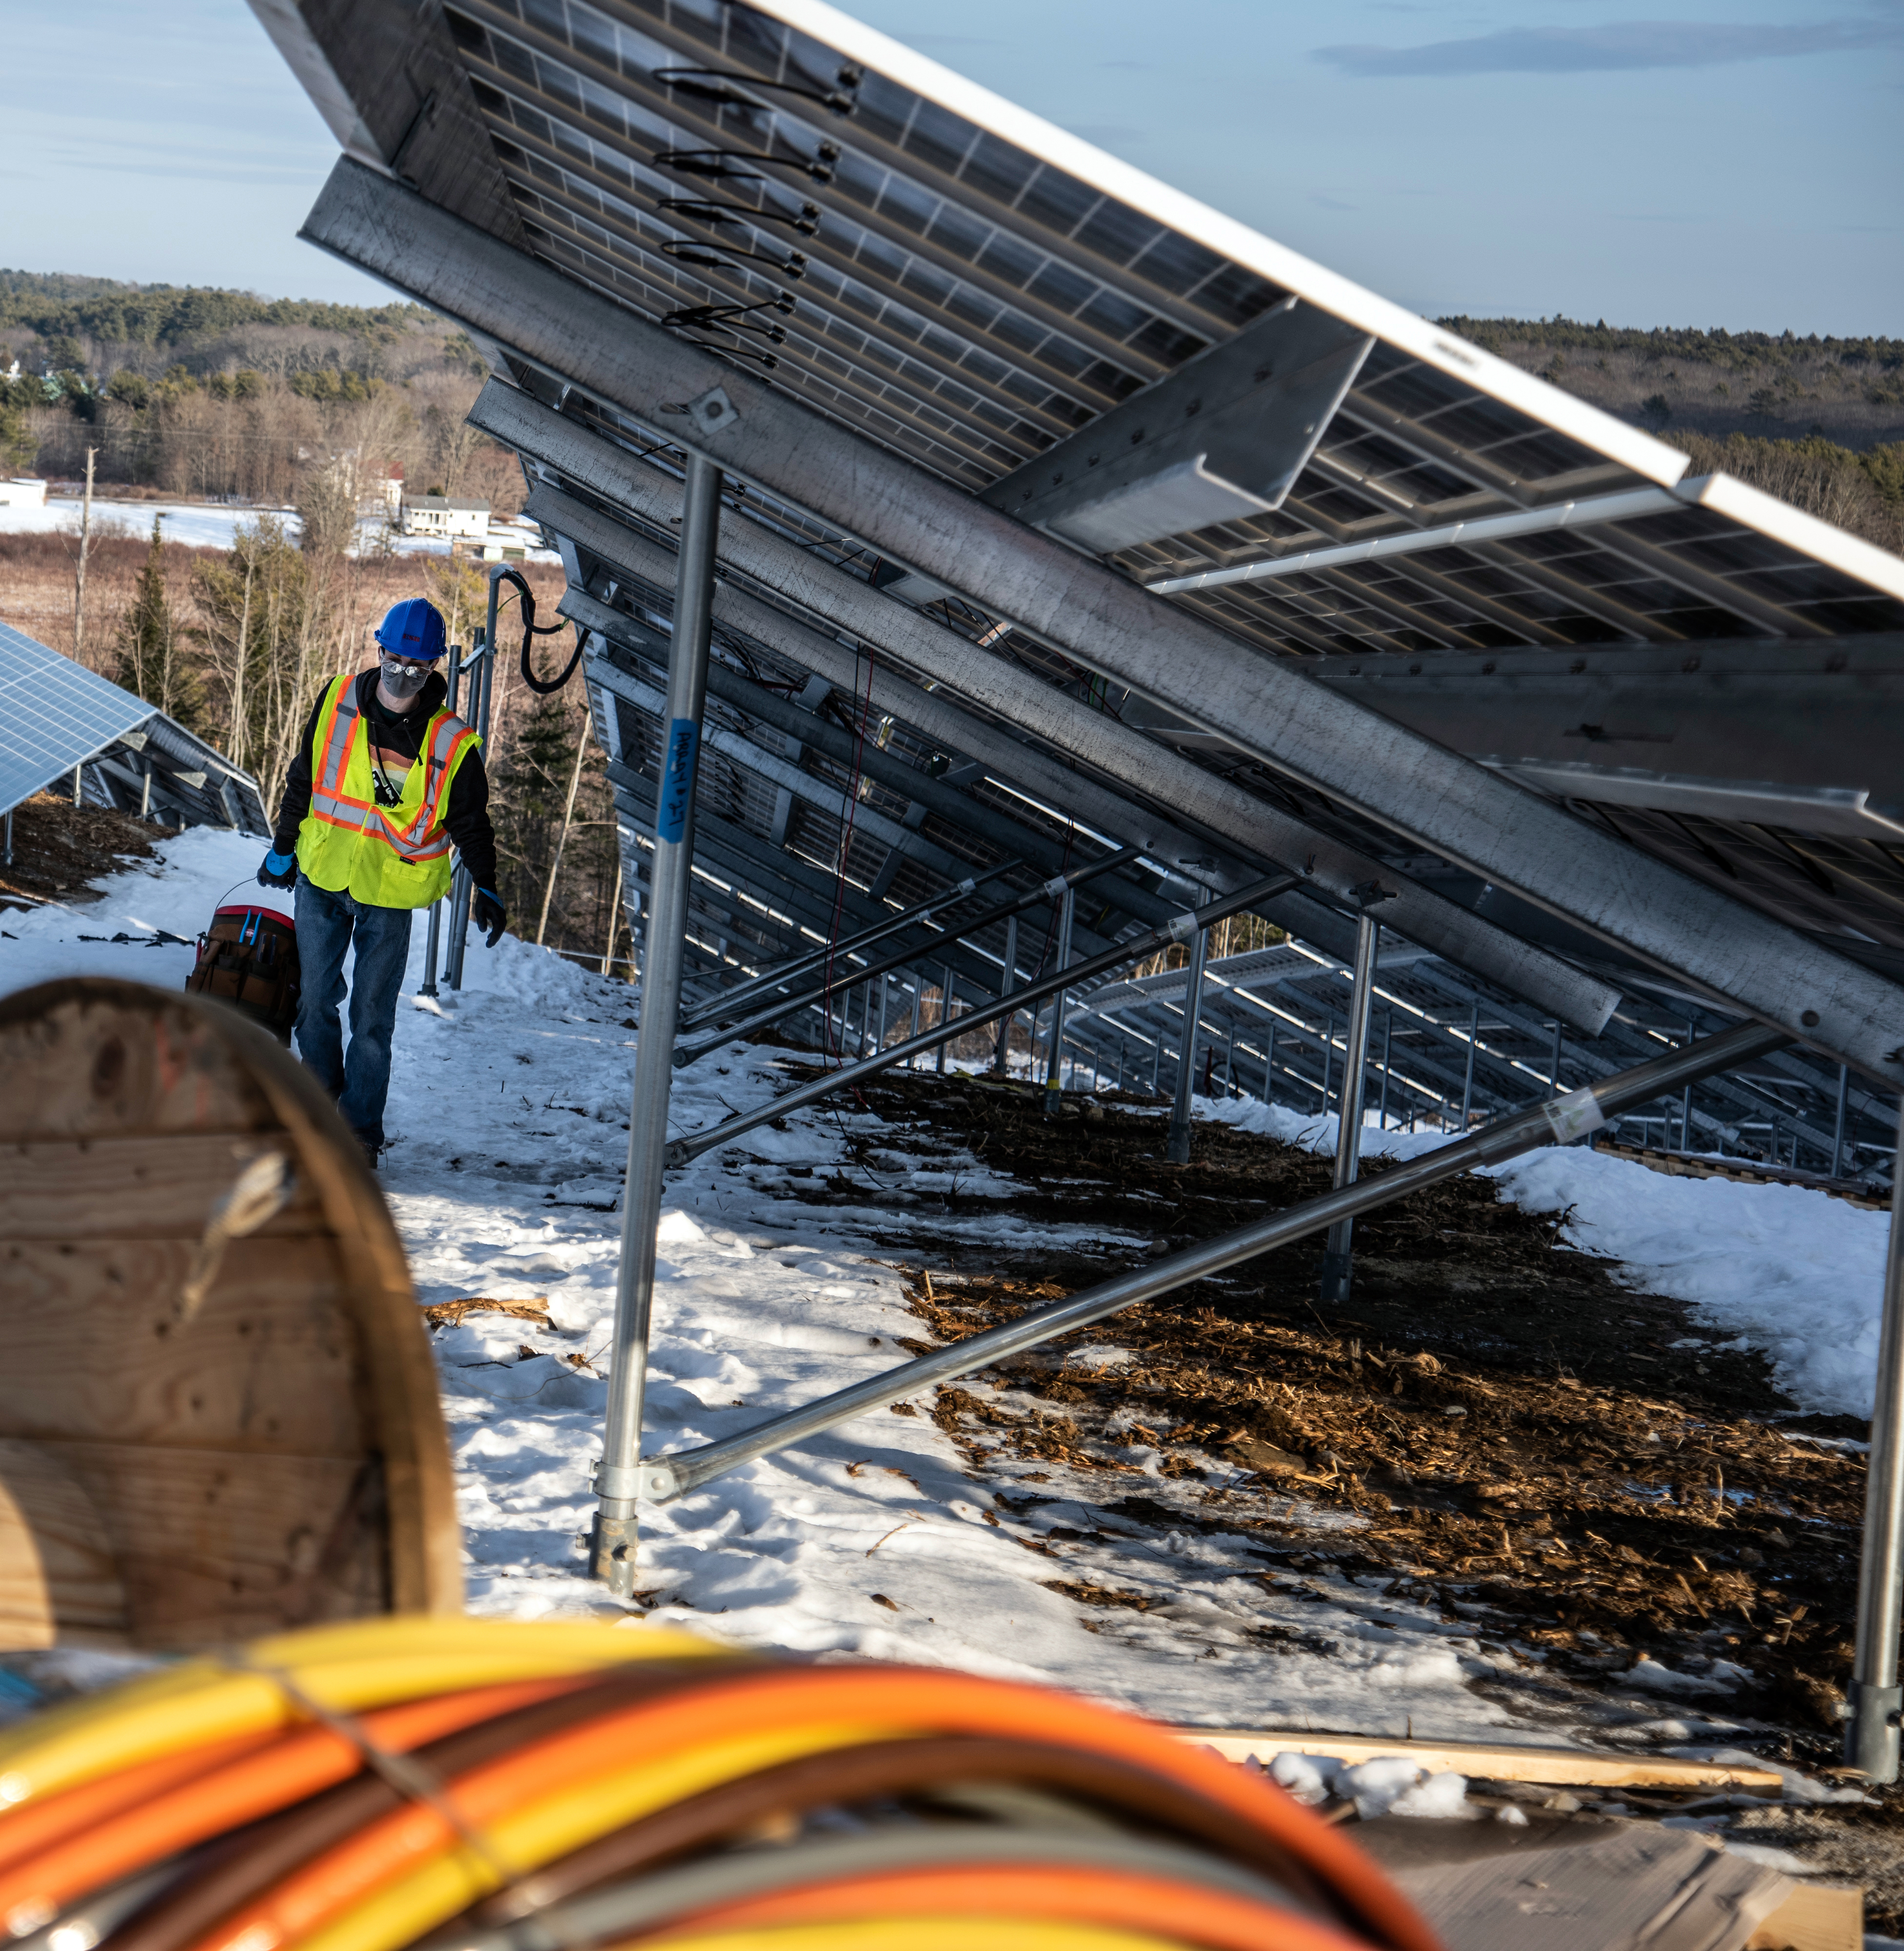 A worker walks past solar panels at the SunRaise solar garden in Waldoboro on Dec. 22. The panels degrade at a rate of 0.5% a year and have 25-year warranties. (Bisi Cameron Yee photo)